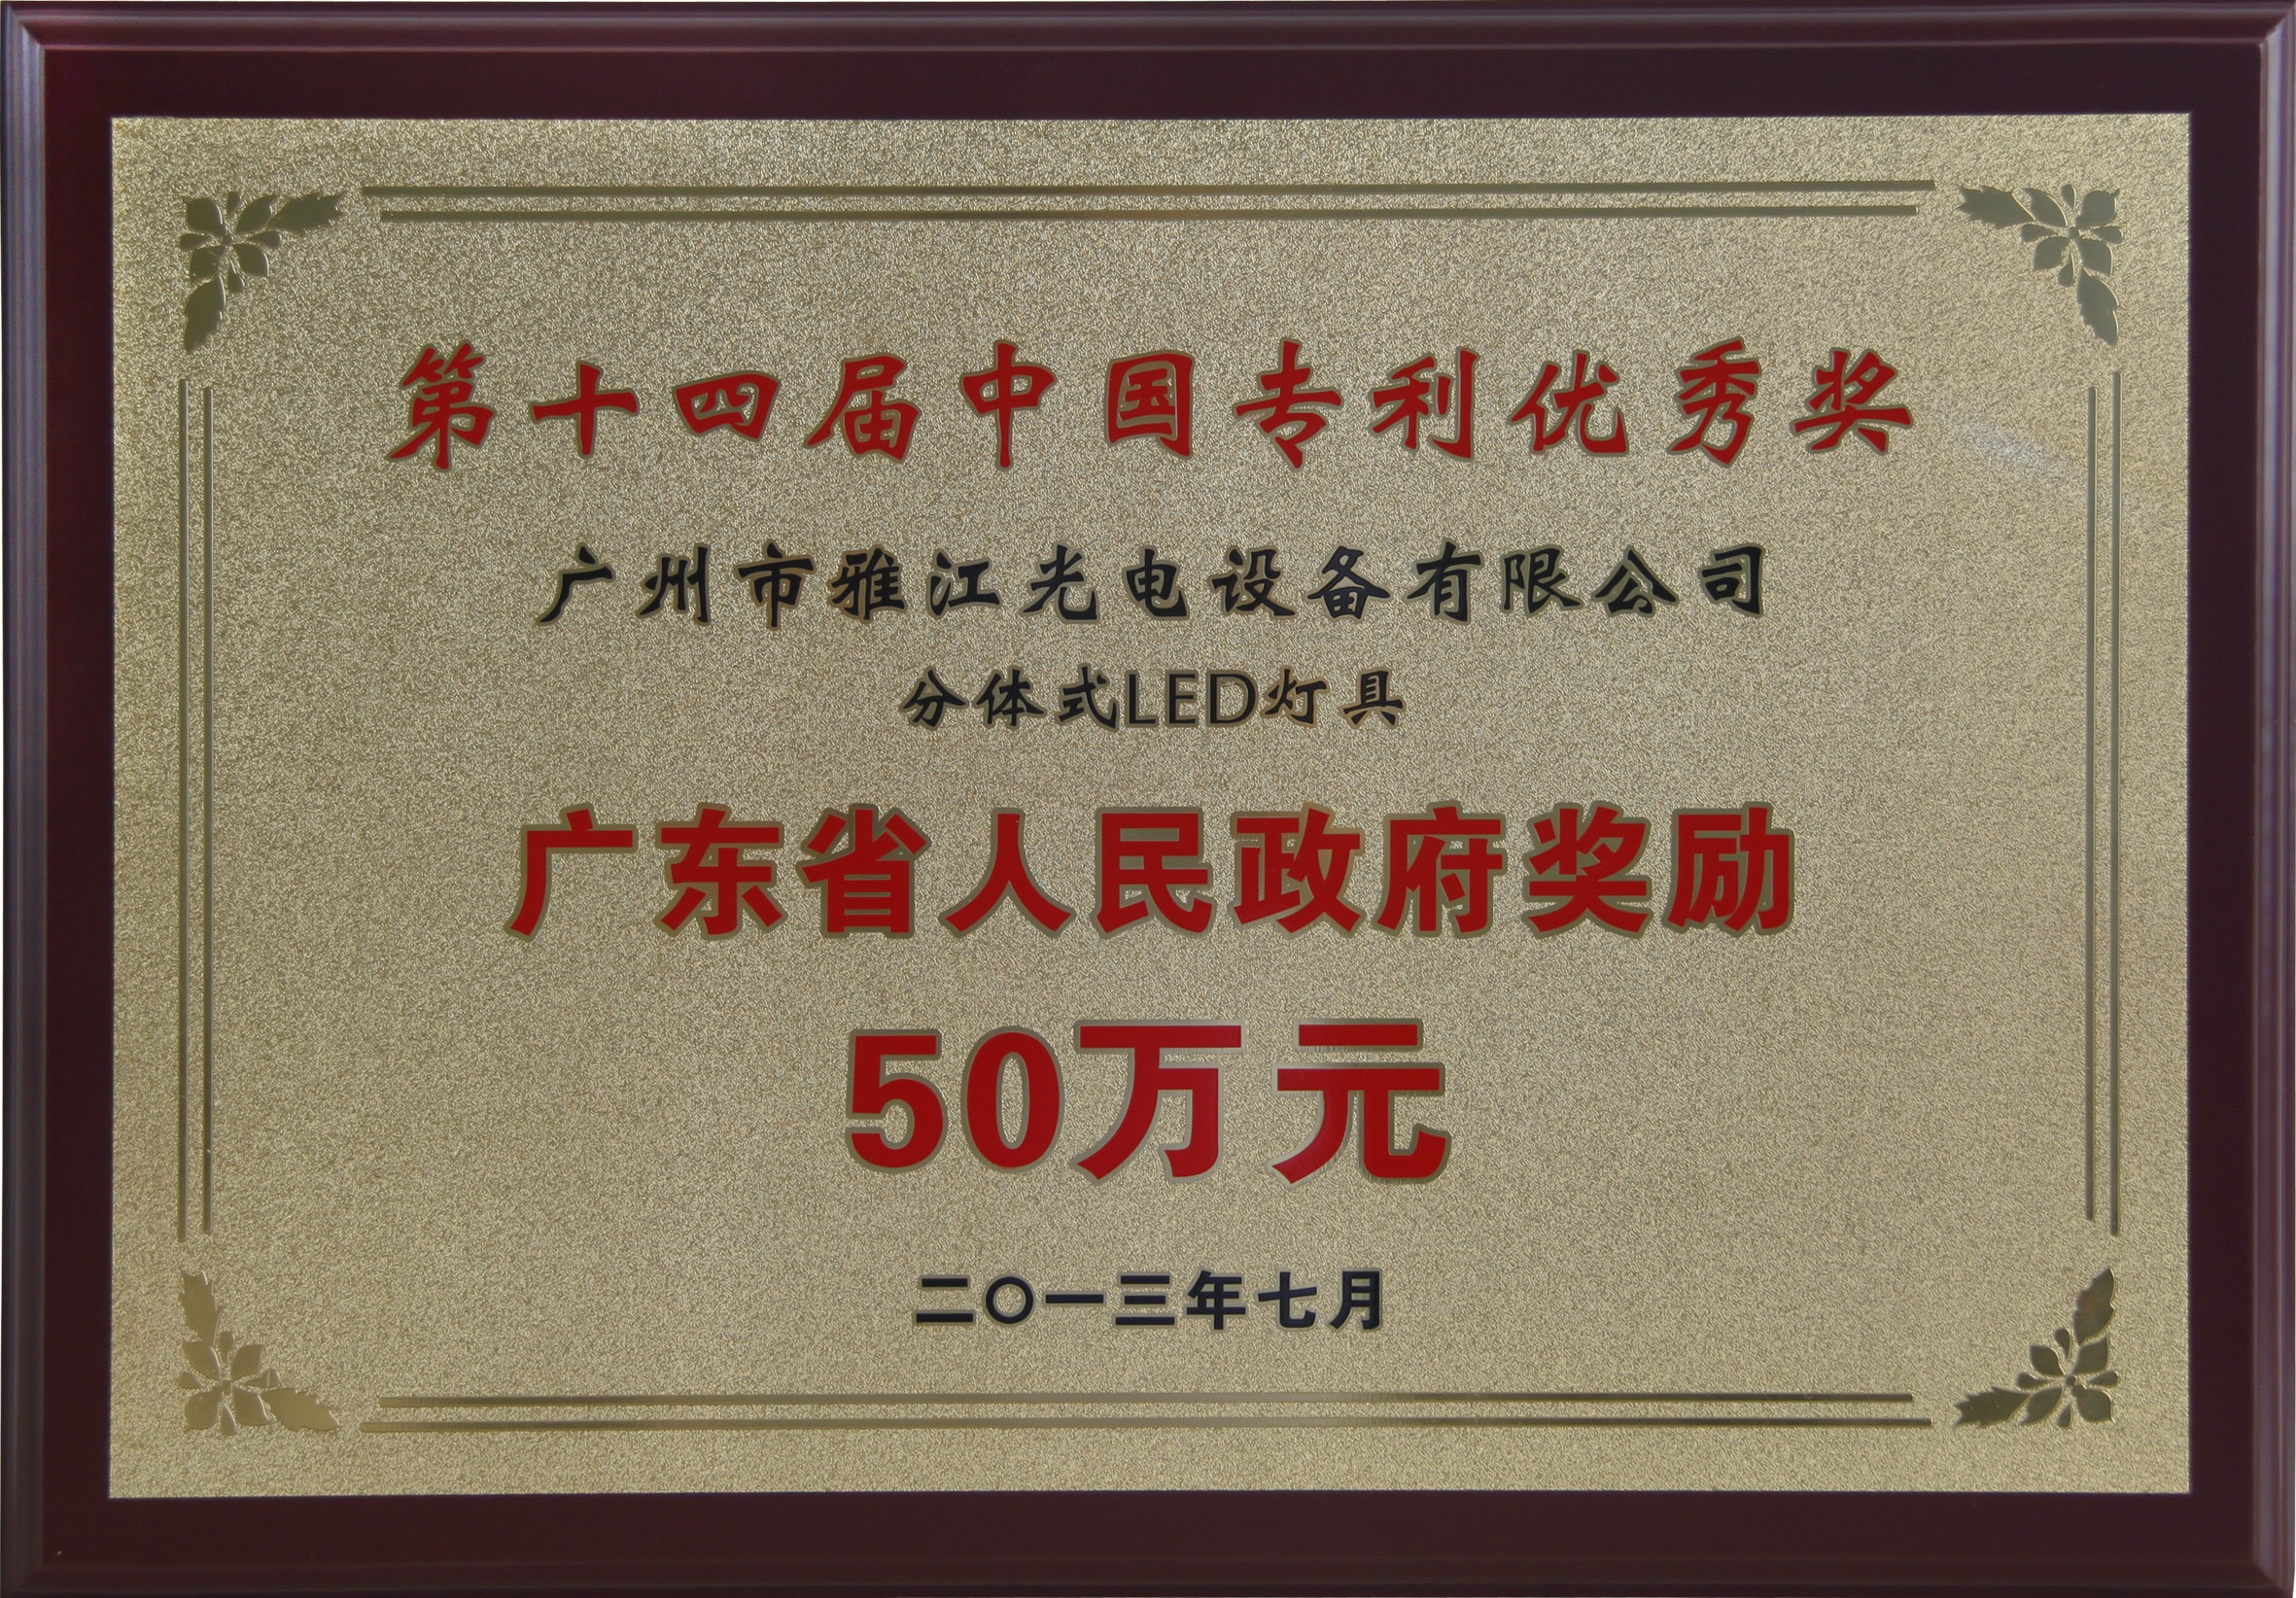 The 14th China Patent Excellence Award